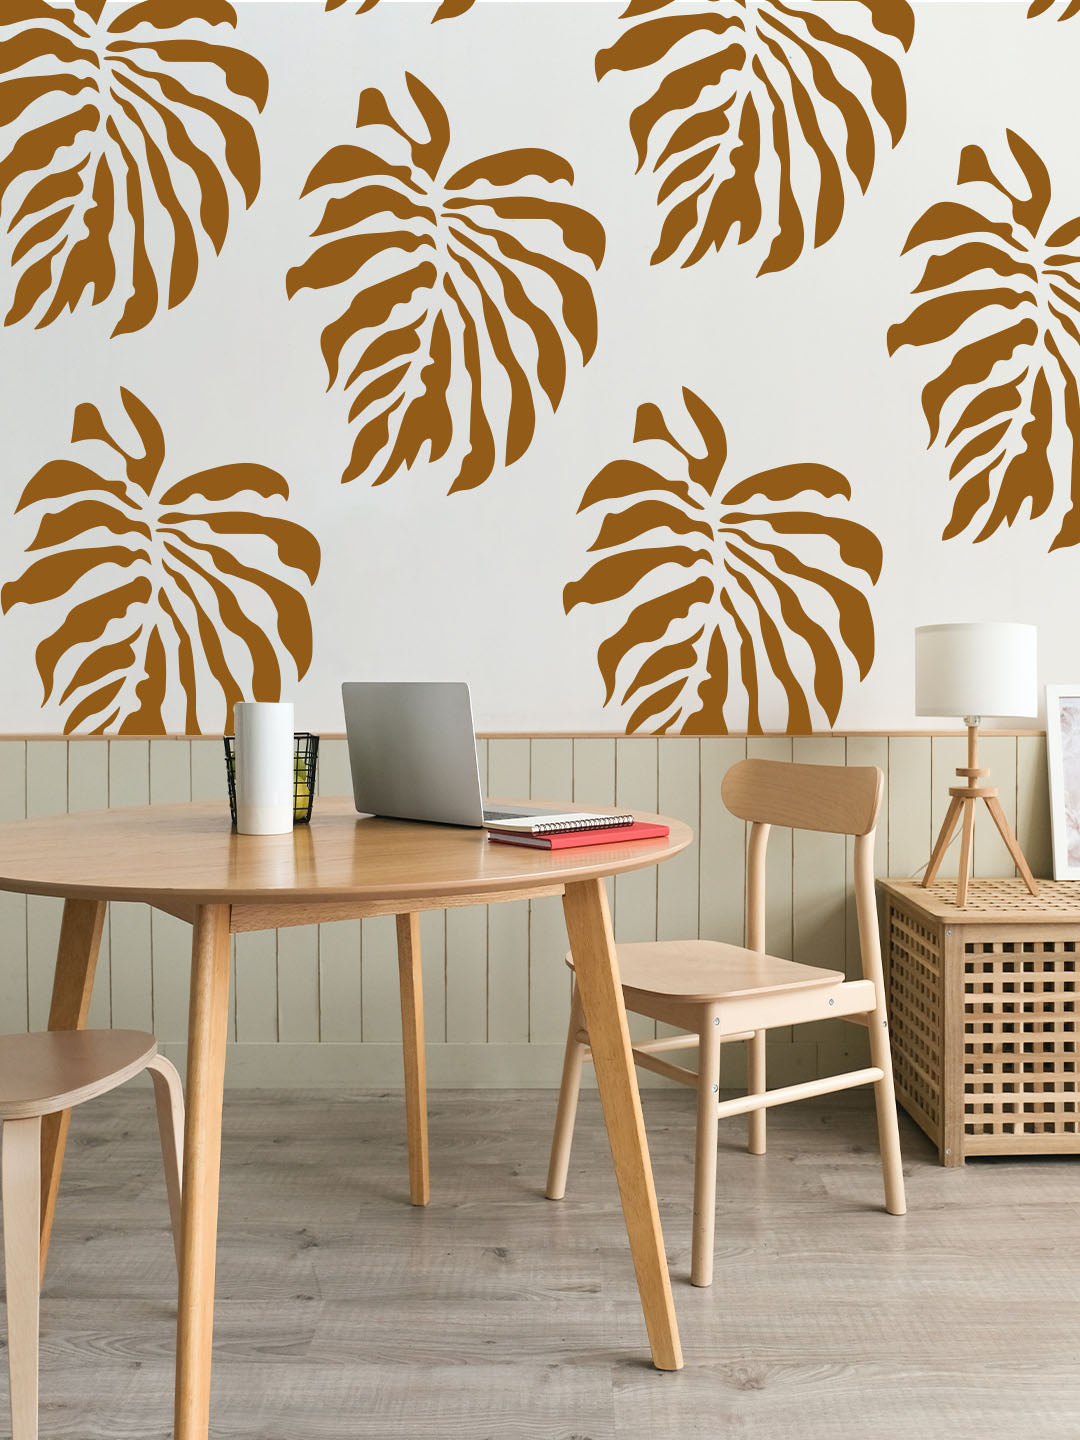 Palm Design Stencils for Wall Painting